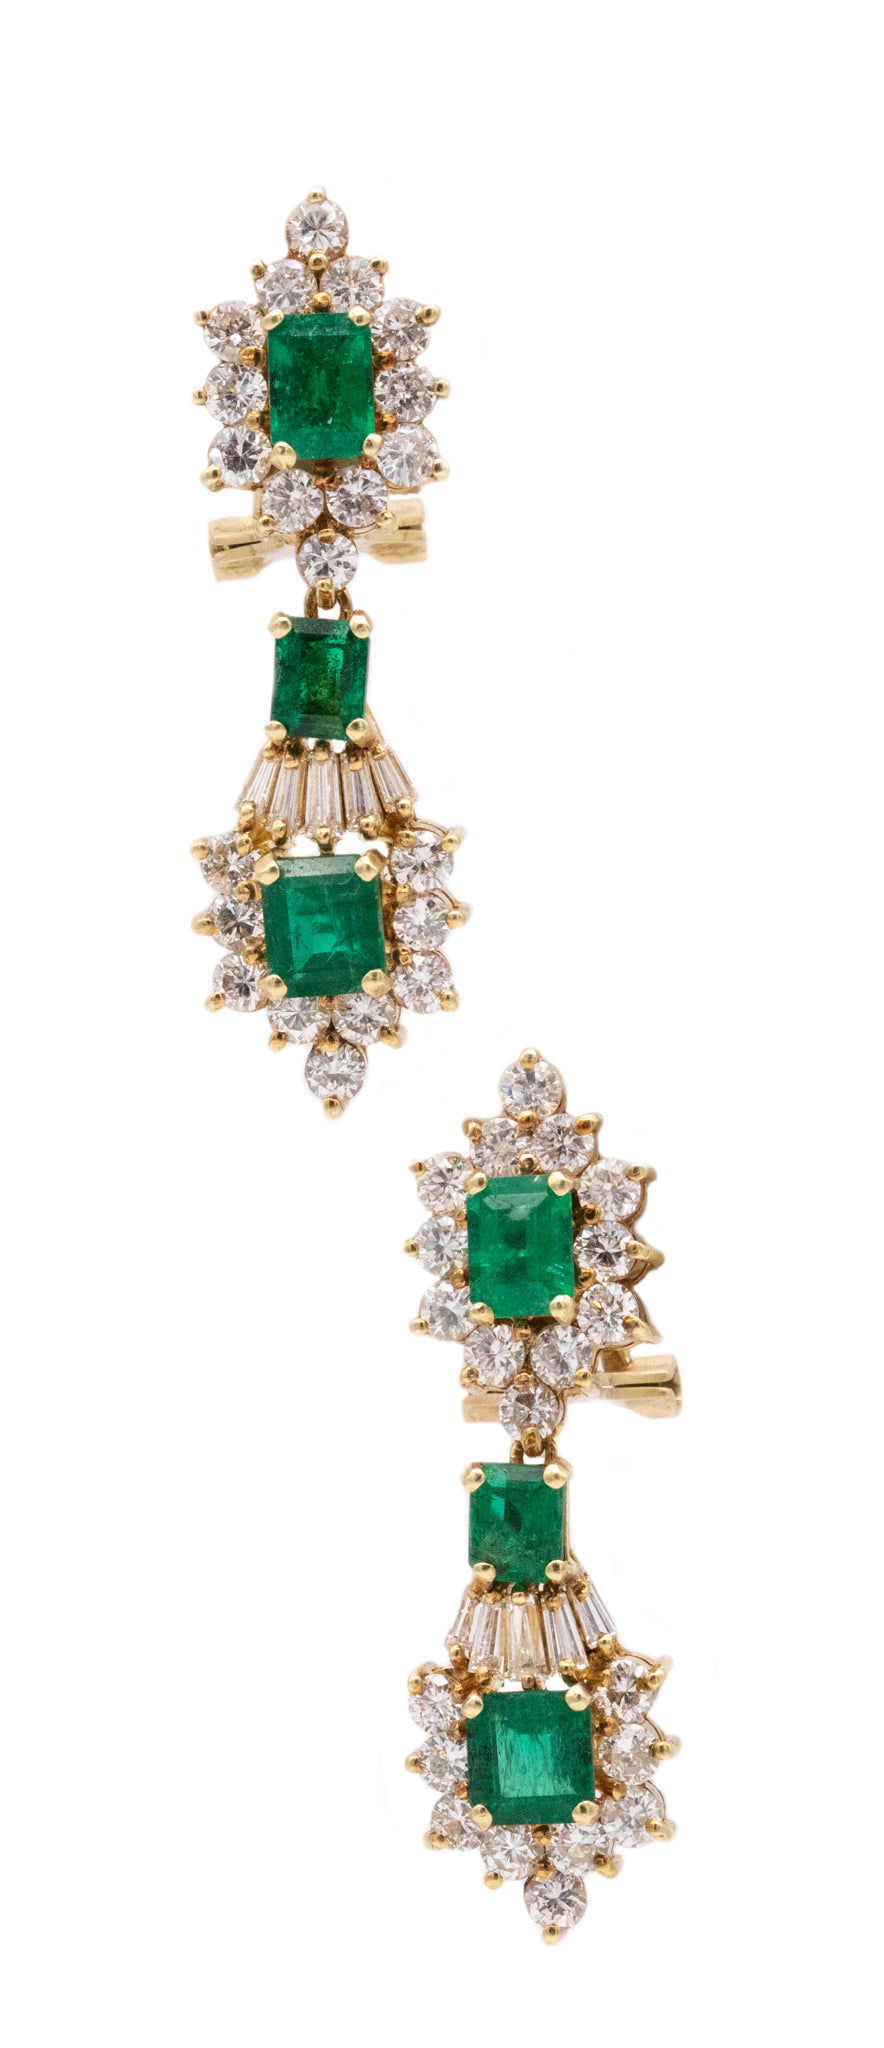 CLASSIC DROP EARRINGS IN 18 KT GOLD WITH 4.65 Ctw IN DIAMONDS & COLOMBIAN EMERALDS